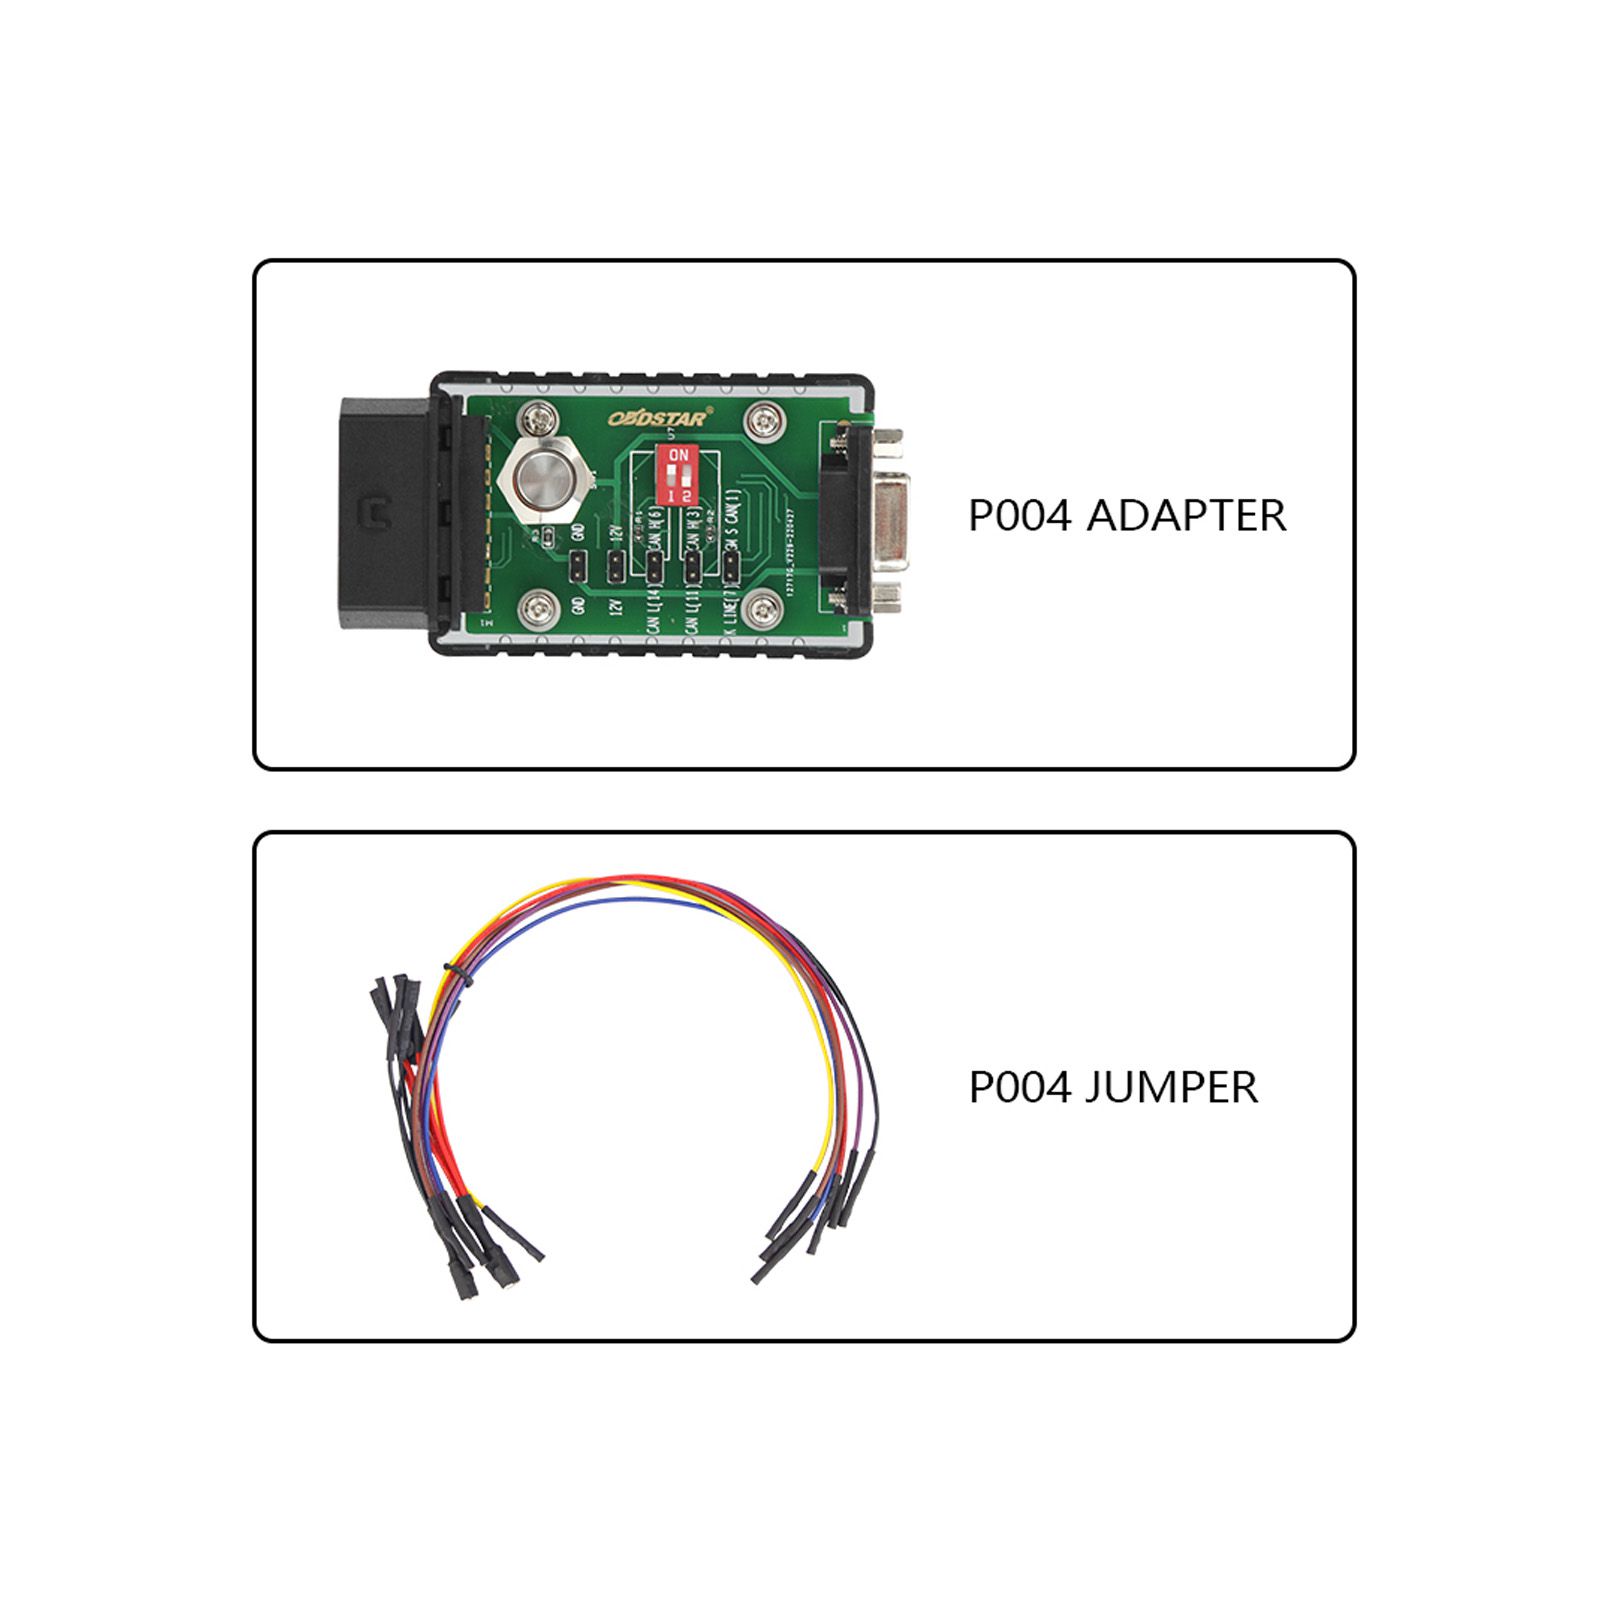 OBDSTAR Airbag Reset Software Authorization Plus P004 Adapter and Jumper Cable for OBDSTAR Odo Master Full Version